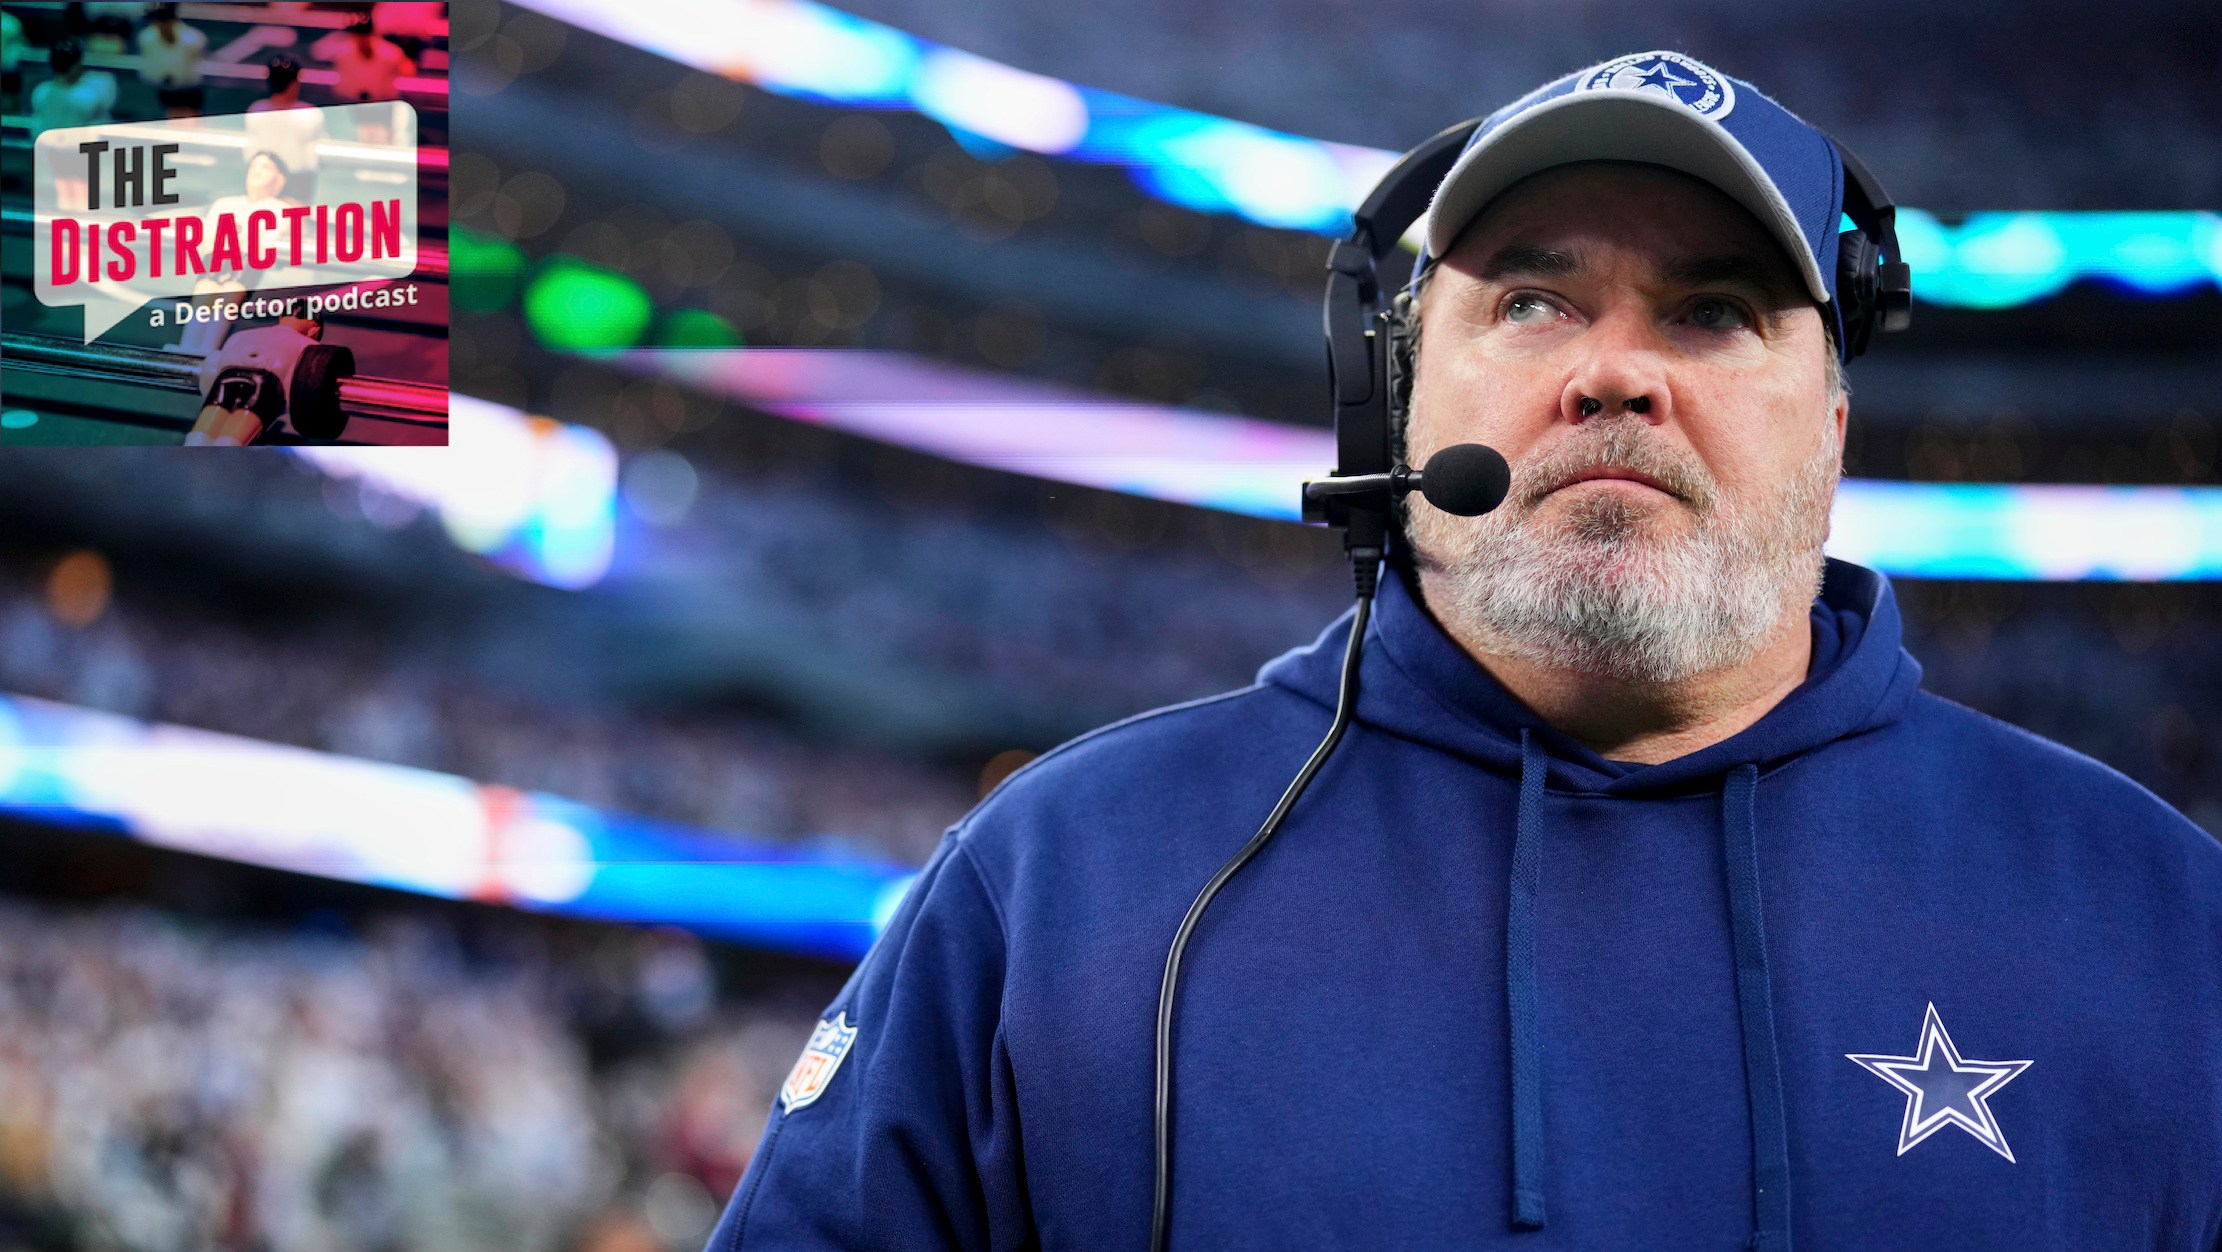 Dallas Cowboys coach Mike McCarthy seeming to look side-eyed at The Distraction logo at upper left, in a photo taken before the team's Wild Card loss to the Green Bay Packers.